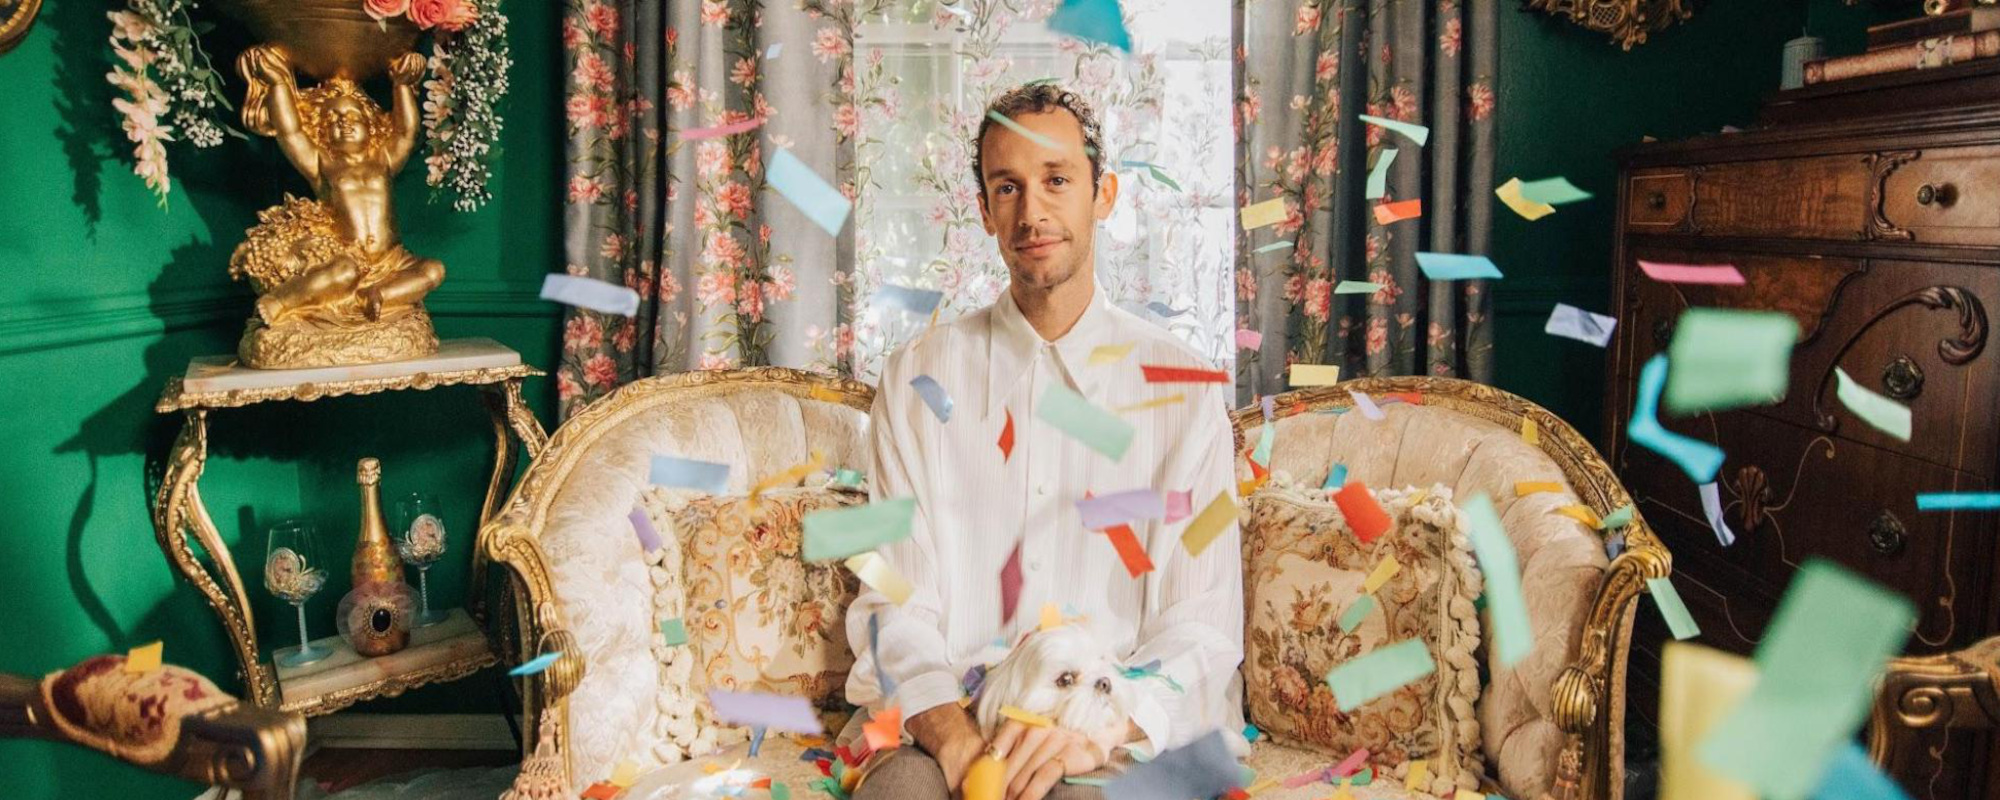 Wrabel on Songwriting: “I’ve Tried to Stay True to What it is That I Love and Feel I Do Best”